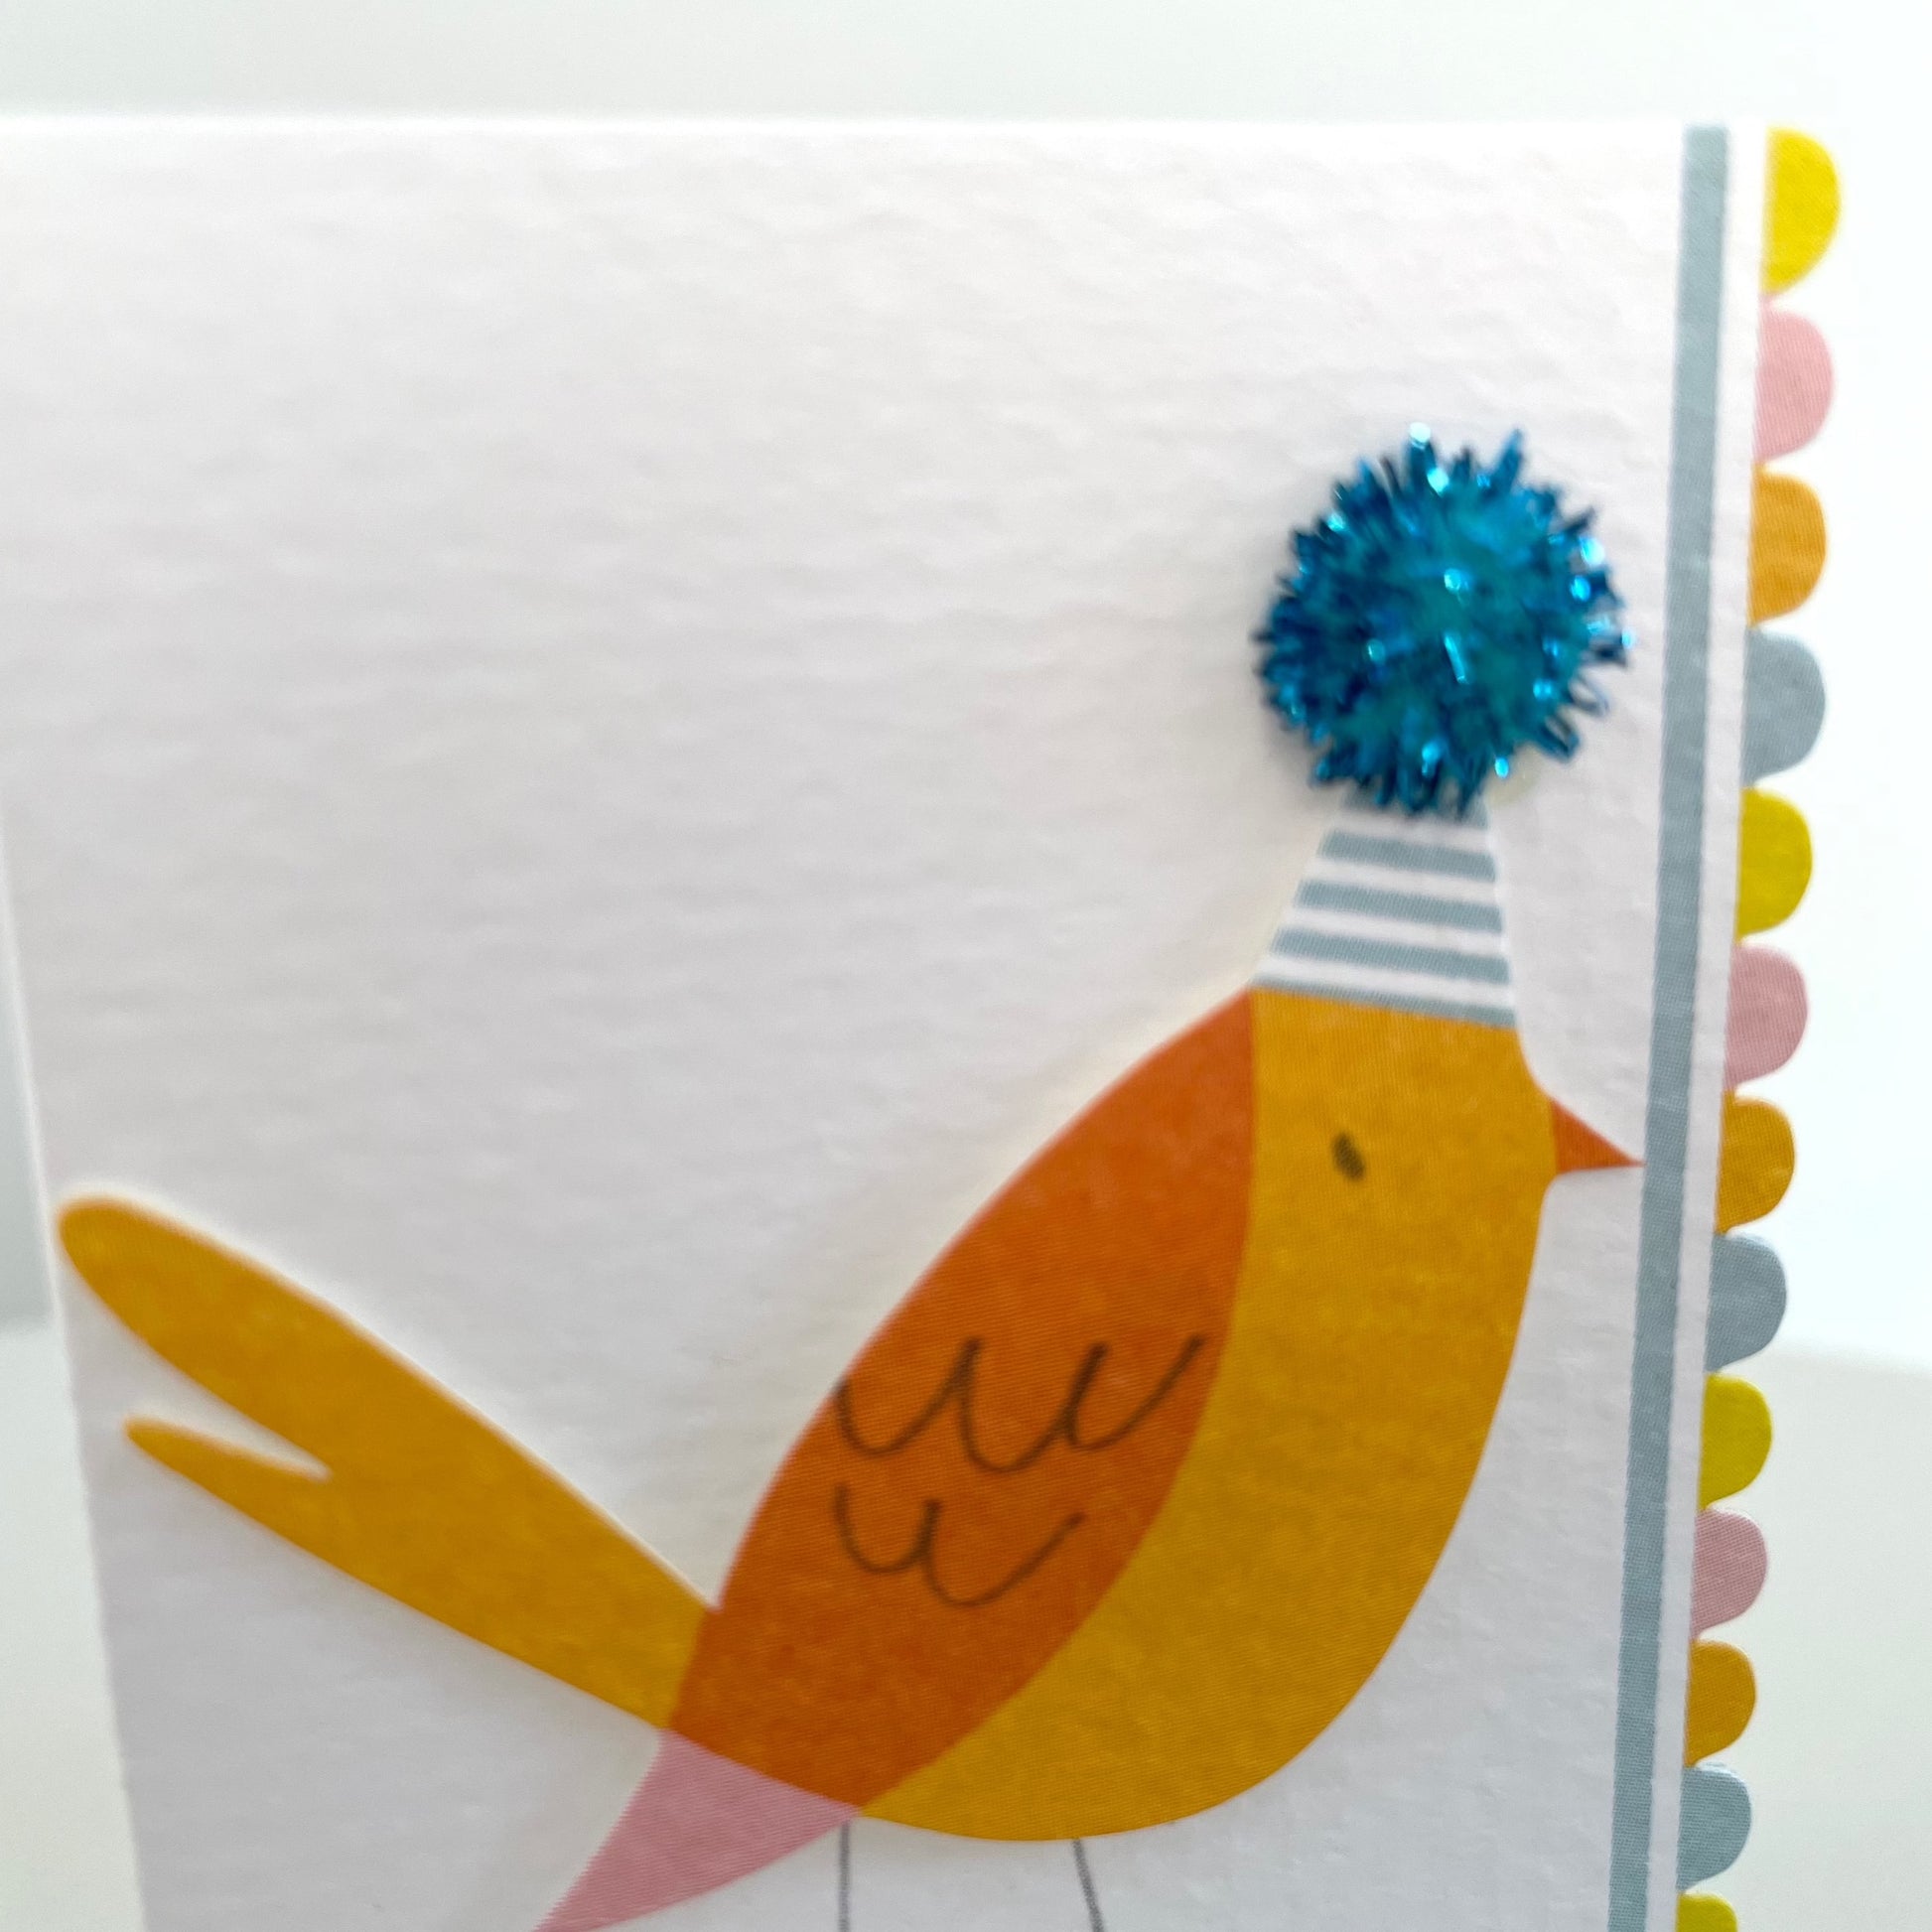 3D mini paper bird gift enclosure card with glitter pompom party hat and striped envelope